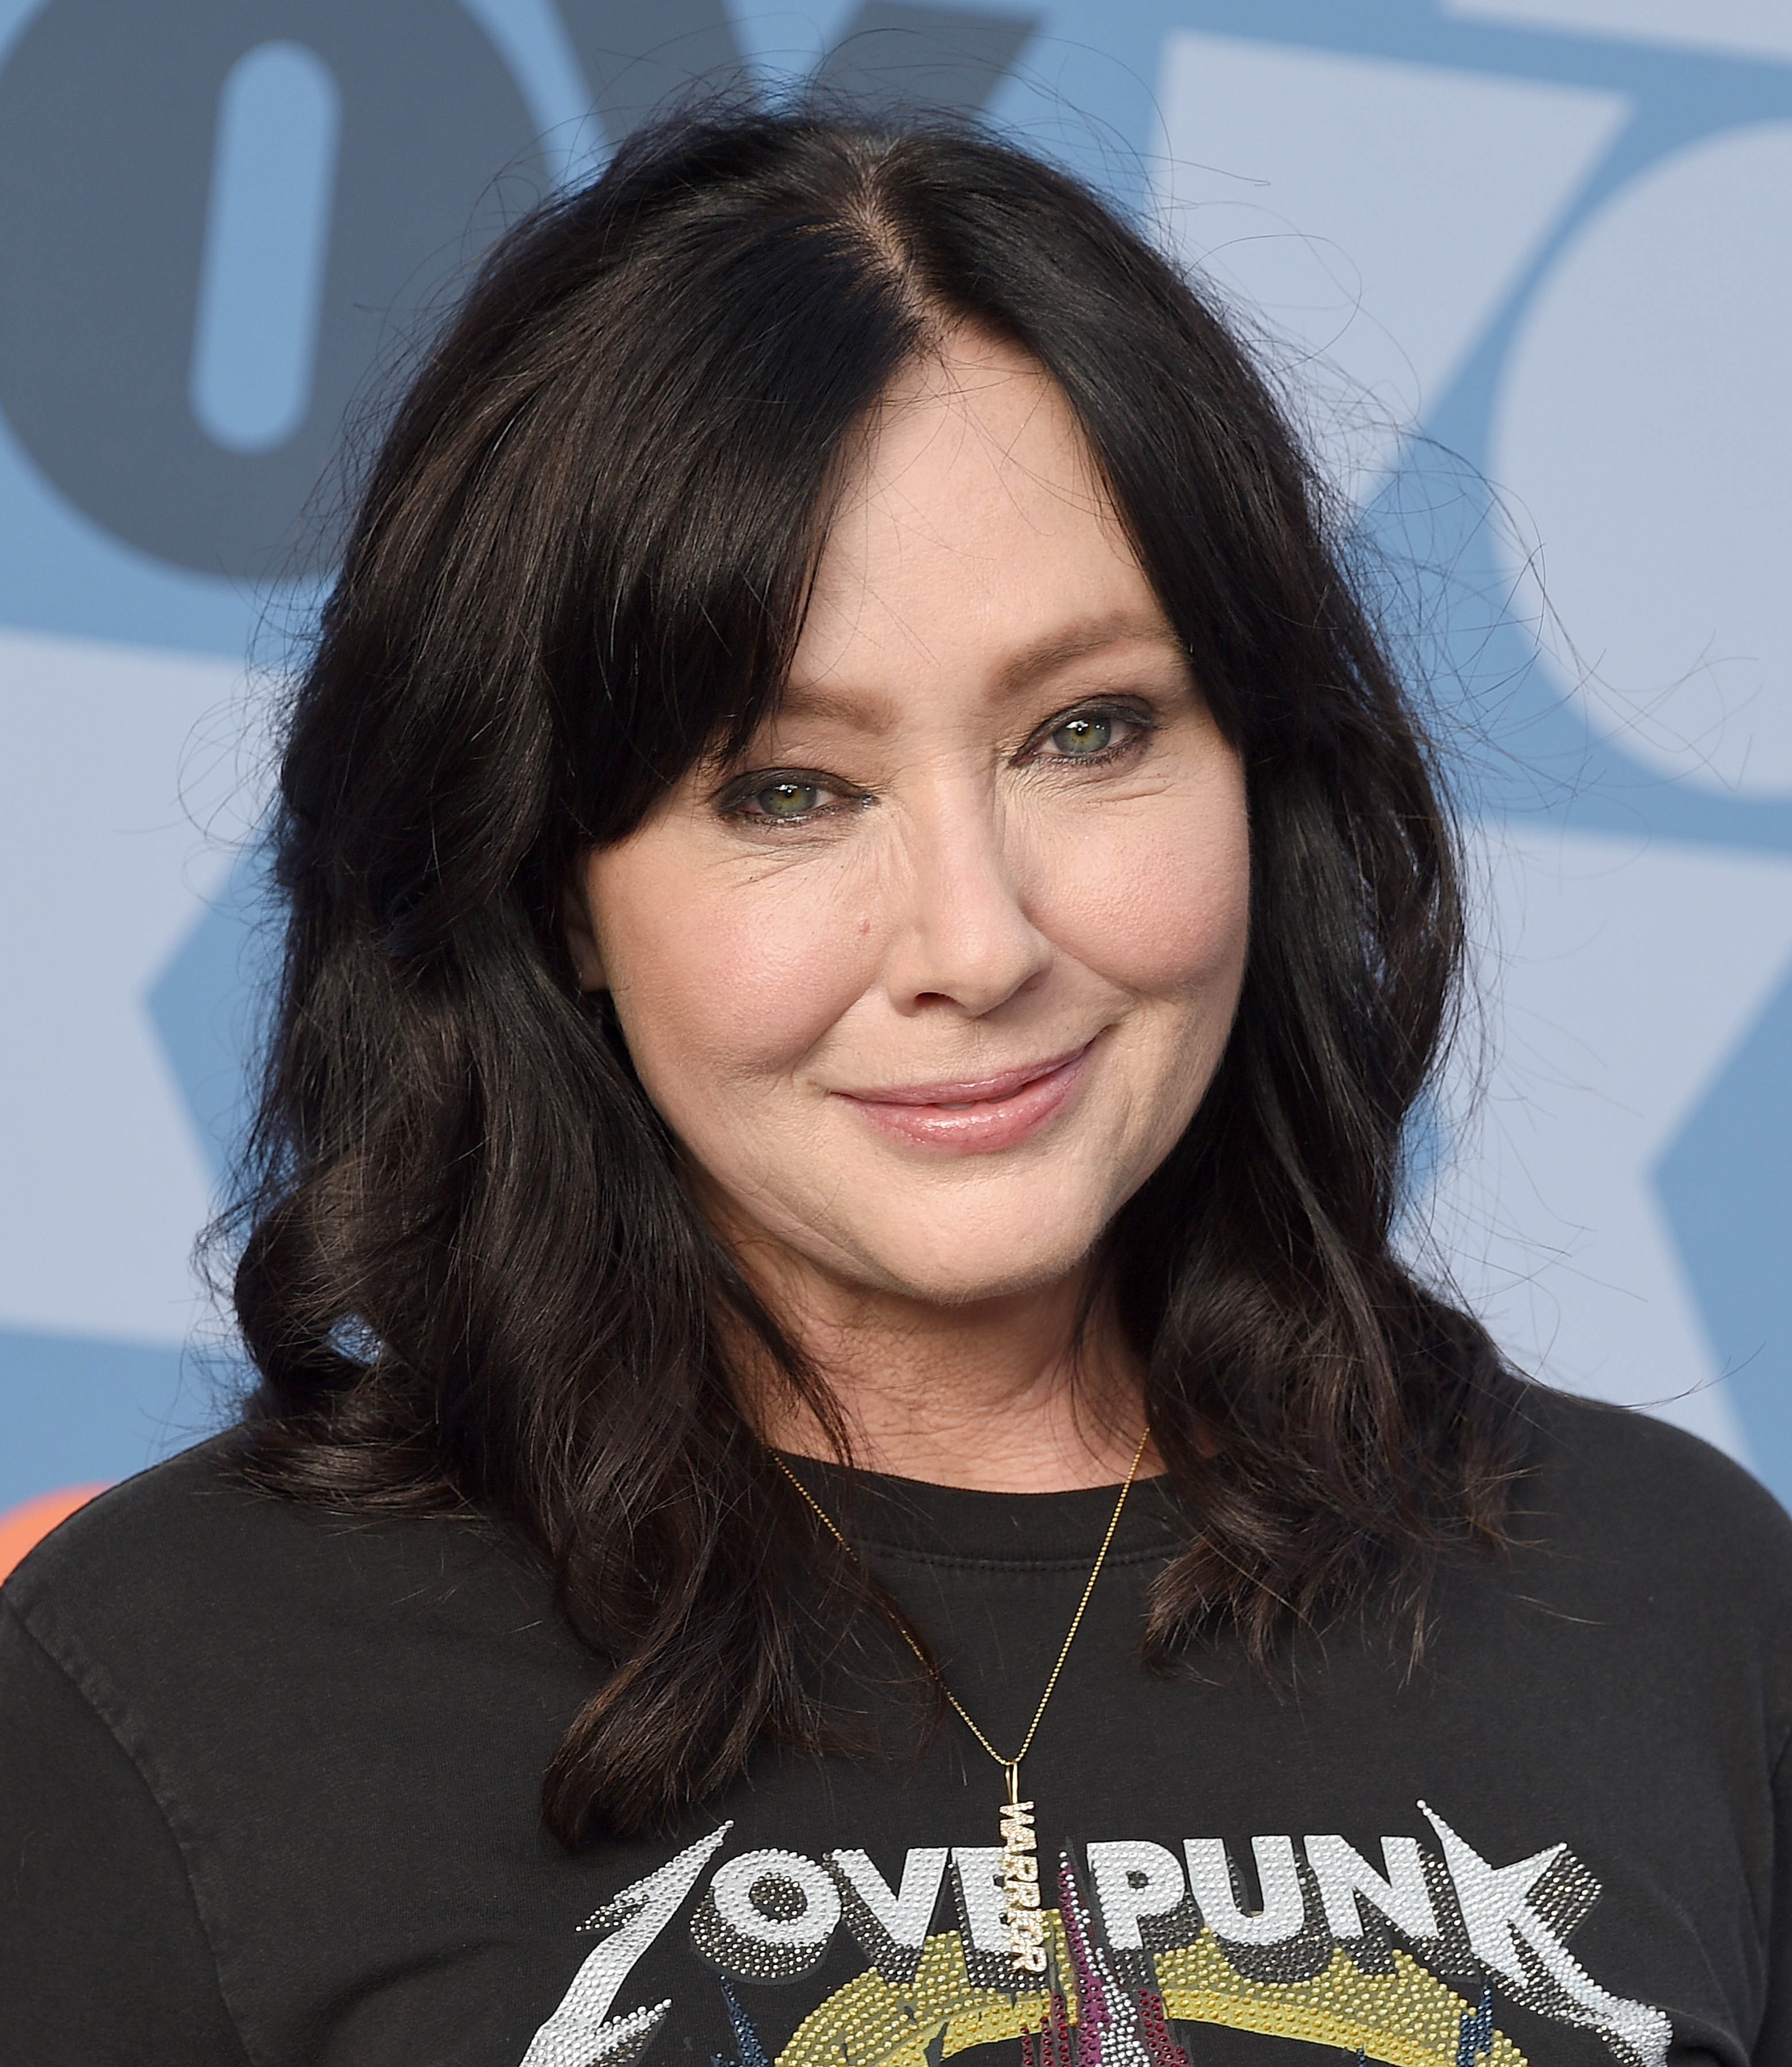 Shannen Doherty at the Fox Summer TCA All-Star Party in Los Angeles, California on August 7, 2019 | Source: Getty Images